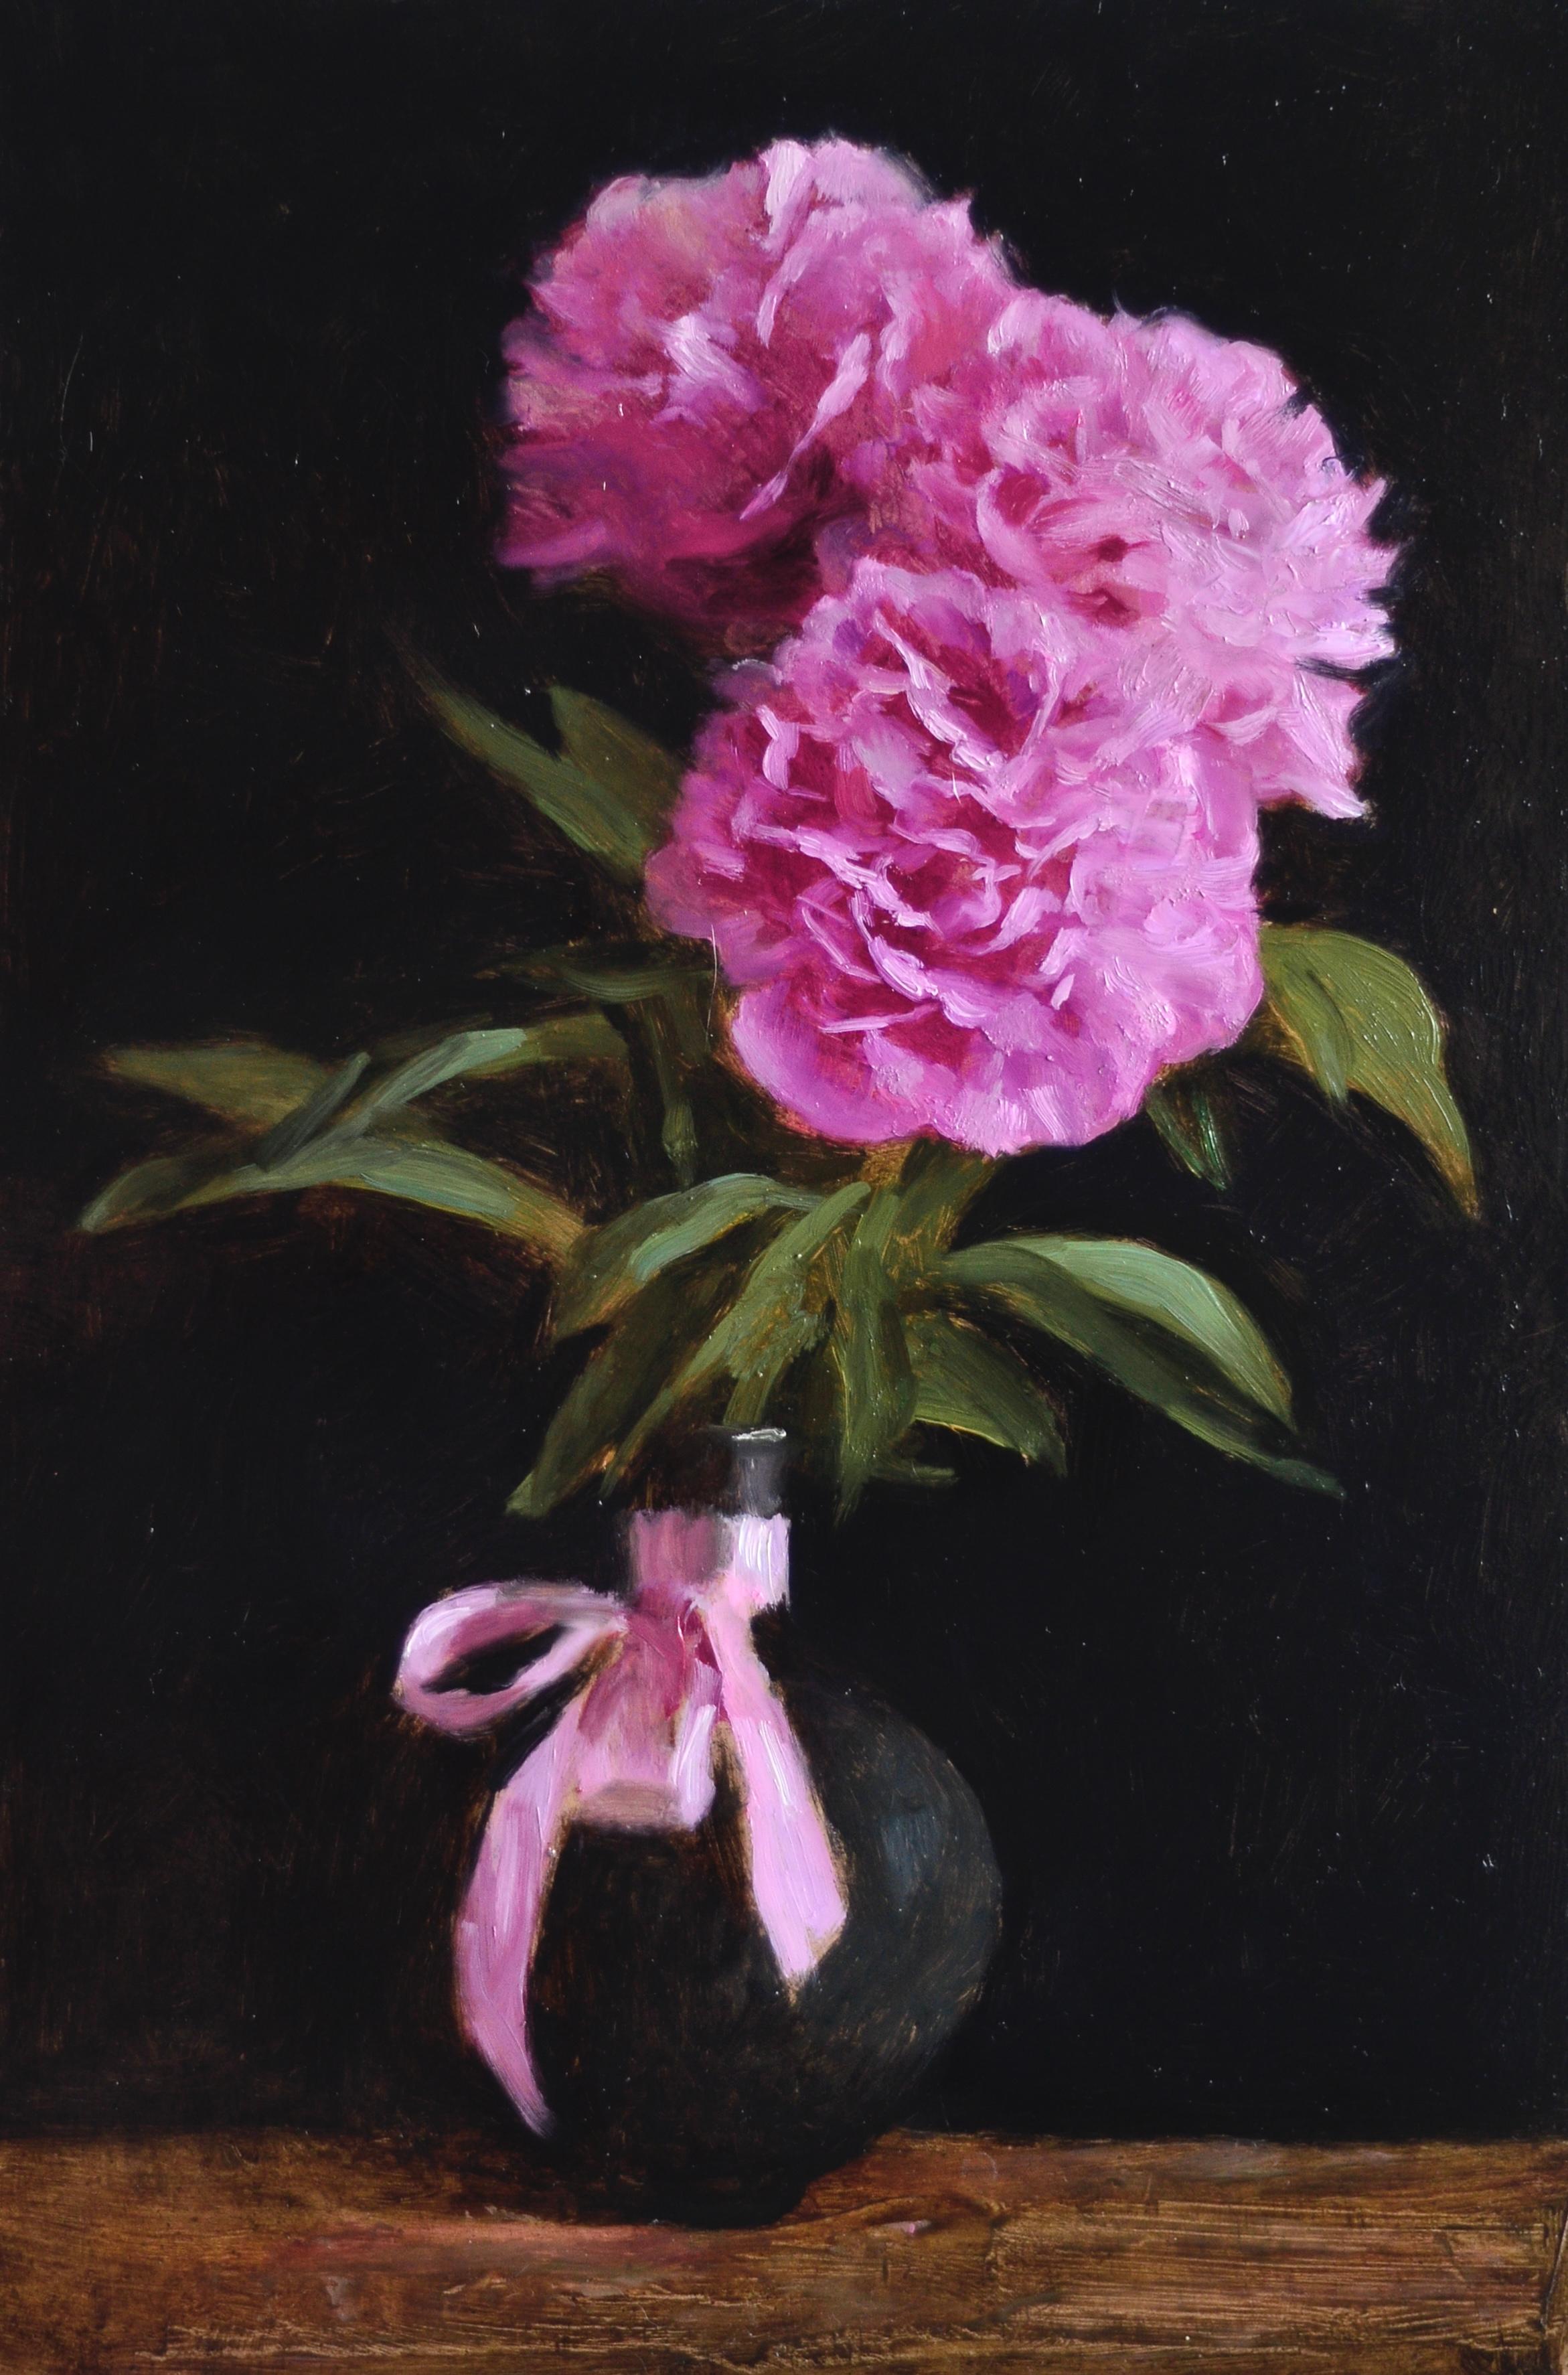 Pink Peonies - 21st Century Contemporary Still Life Floral Oil Painting